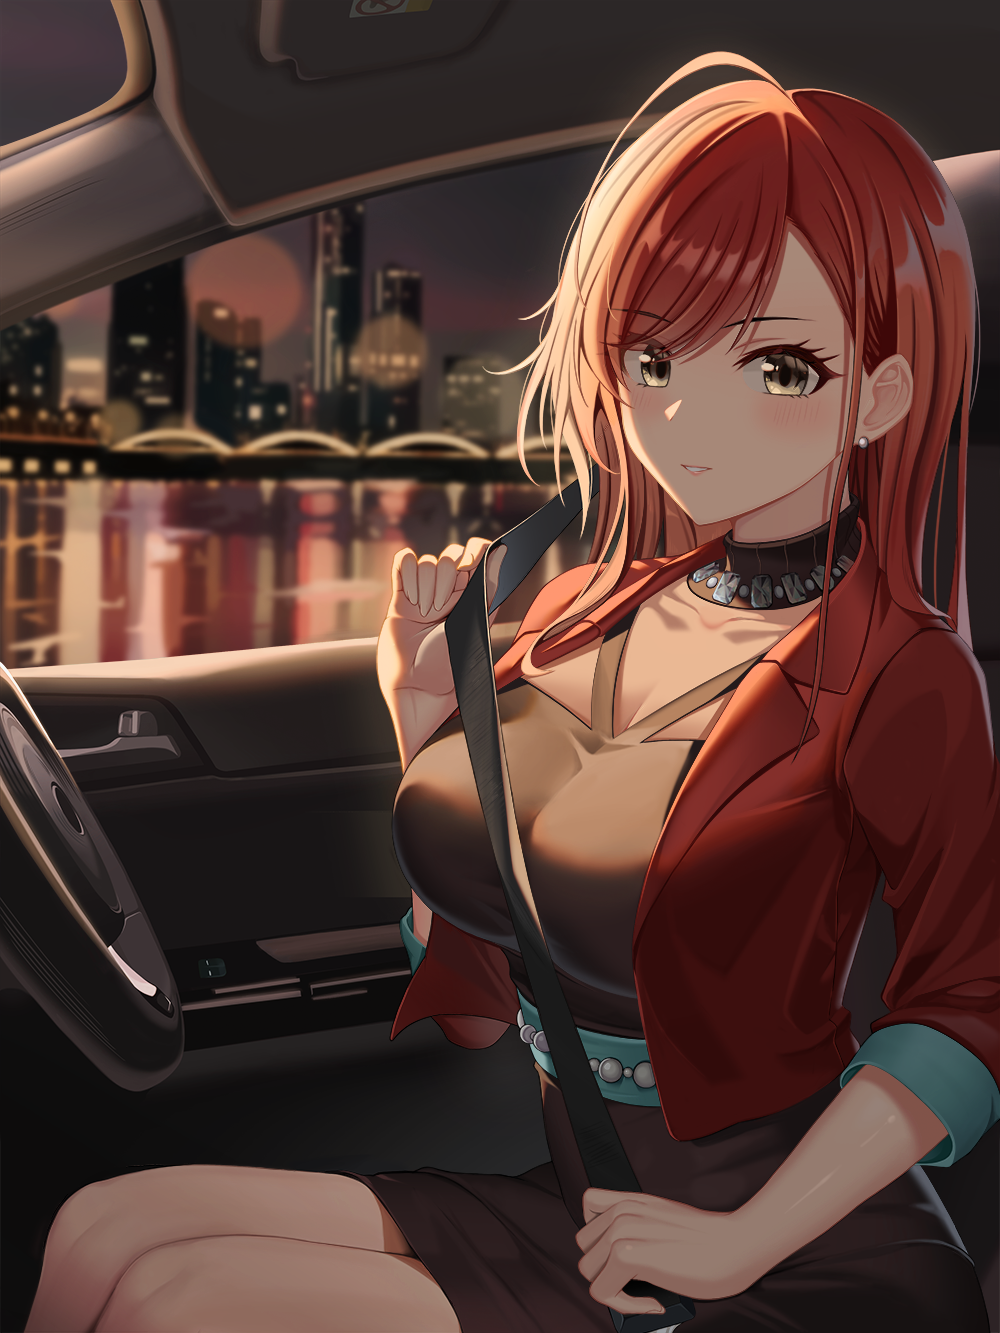 Anime Anime Girls Redhead Women With Cars Car Car Interior Looking At Viewer Yellow Eyes Dress Artwo 1000x1333